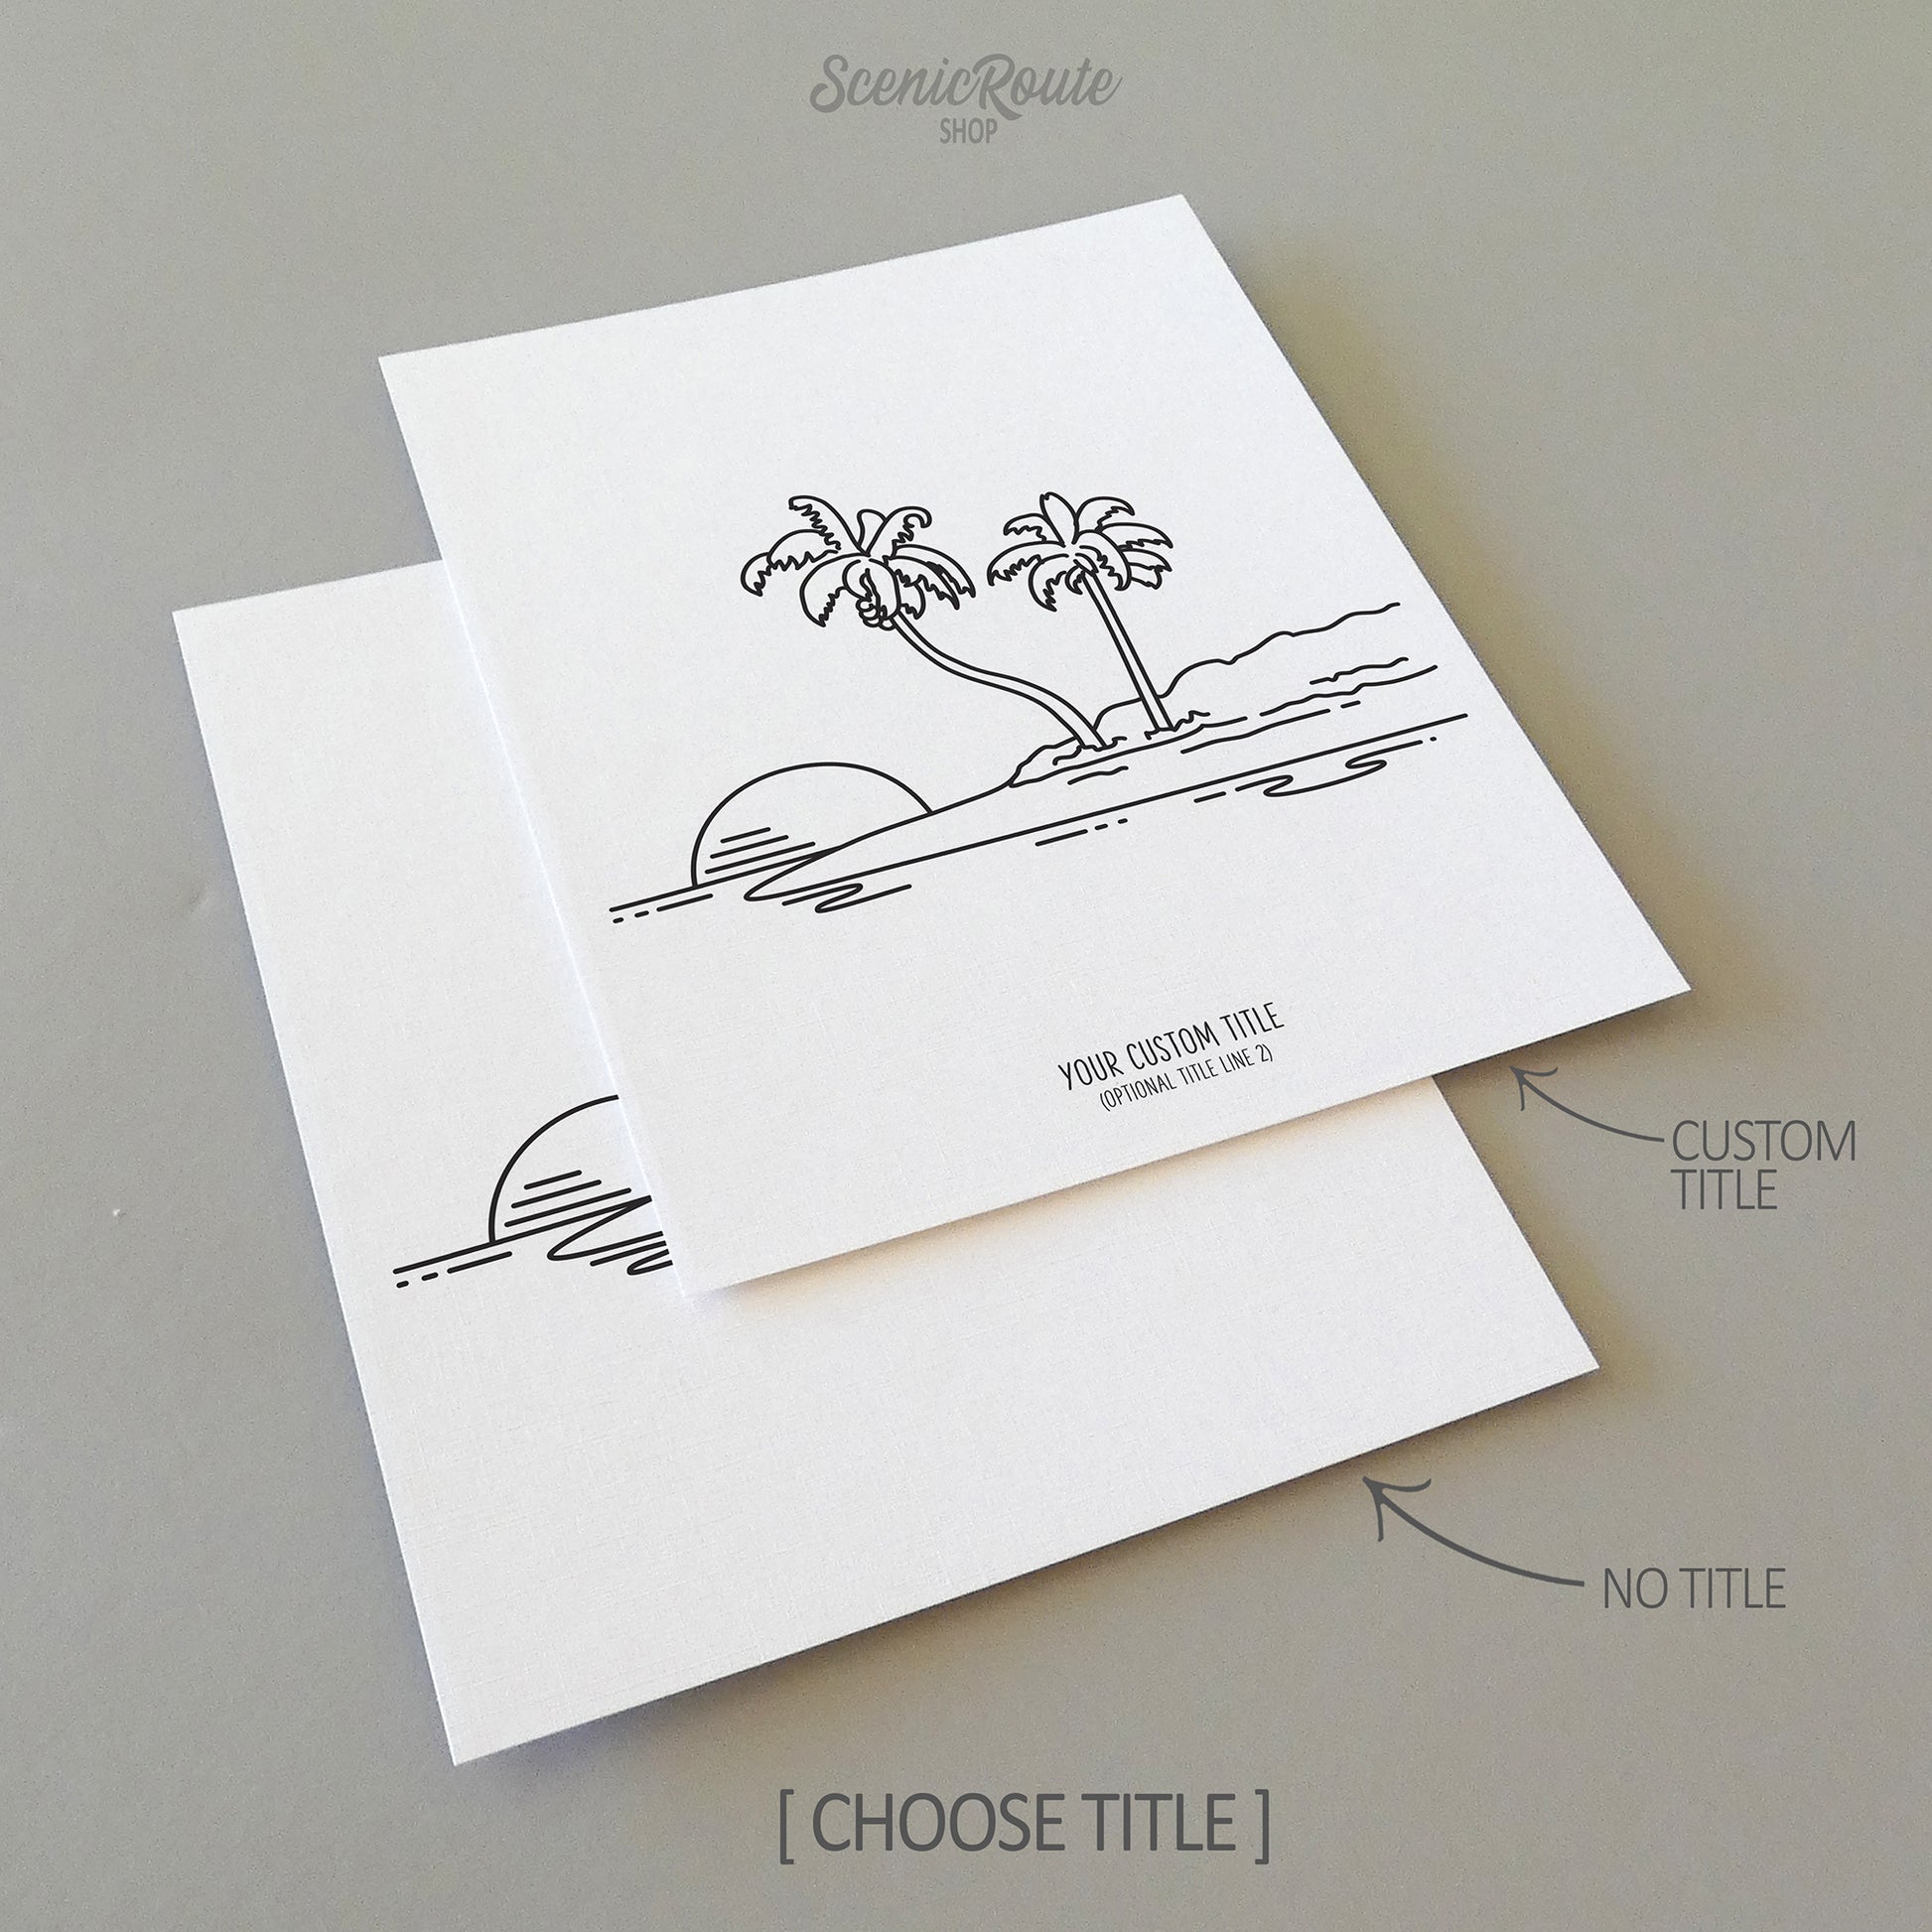 Two line art drawings of an island with two palm trees and the setting sun on white linen paper with a gray background.  The pieces are shown with “No Title” and “Custom Title” options for the available art print options.